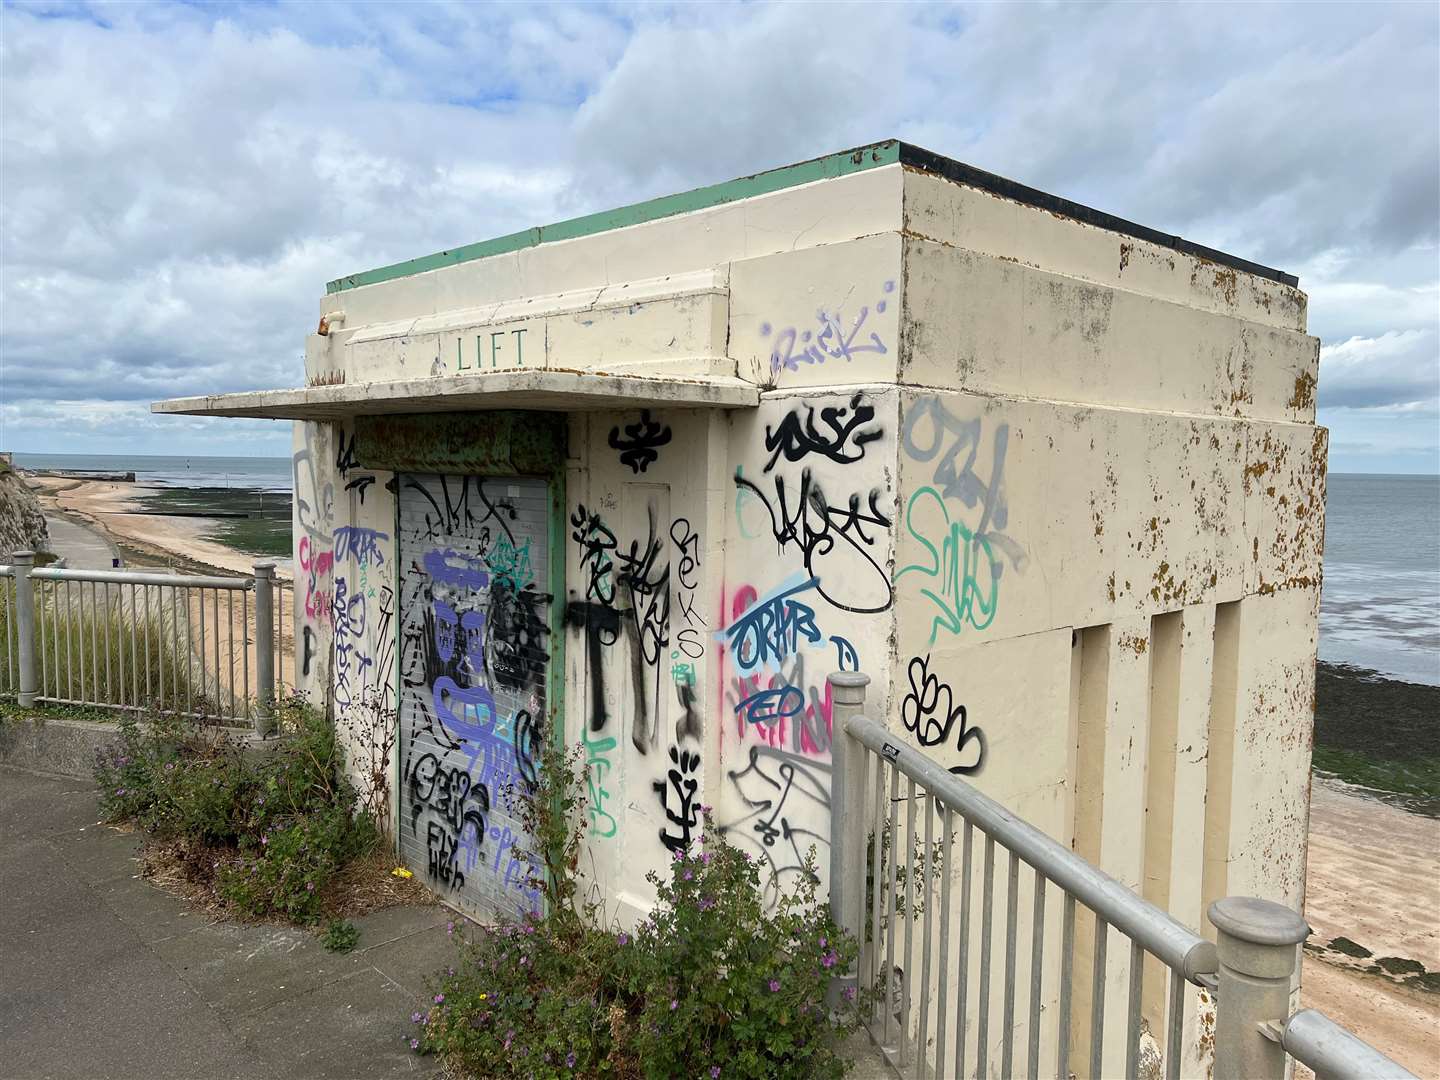 The clifftop access to the art deco lift at Walpole Bay - long since left for weeds and graffiti